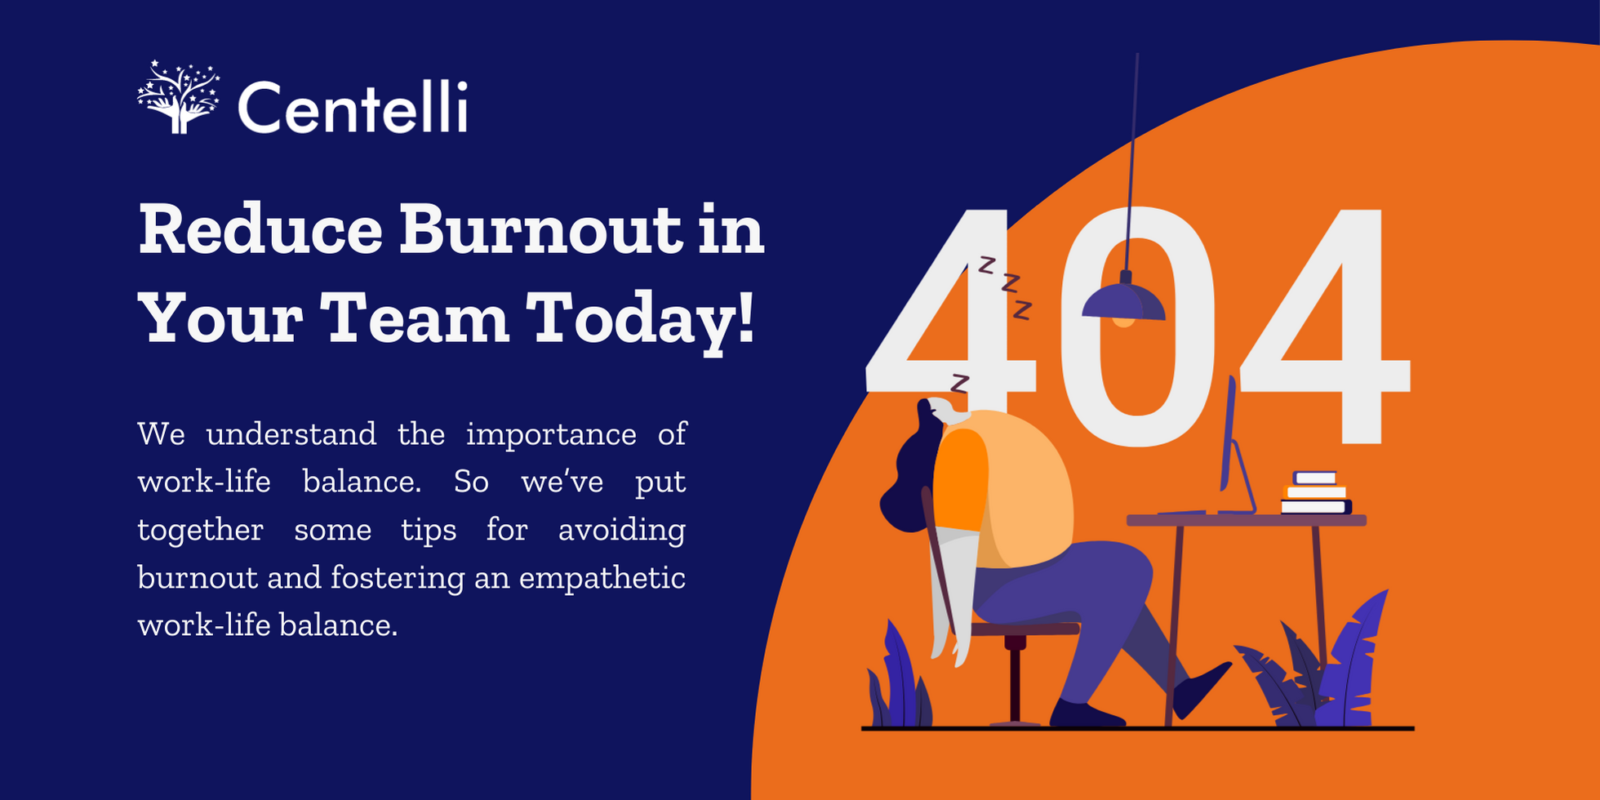 How to Combat the Burnout Epidemic